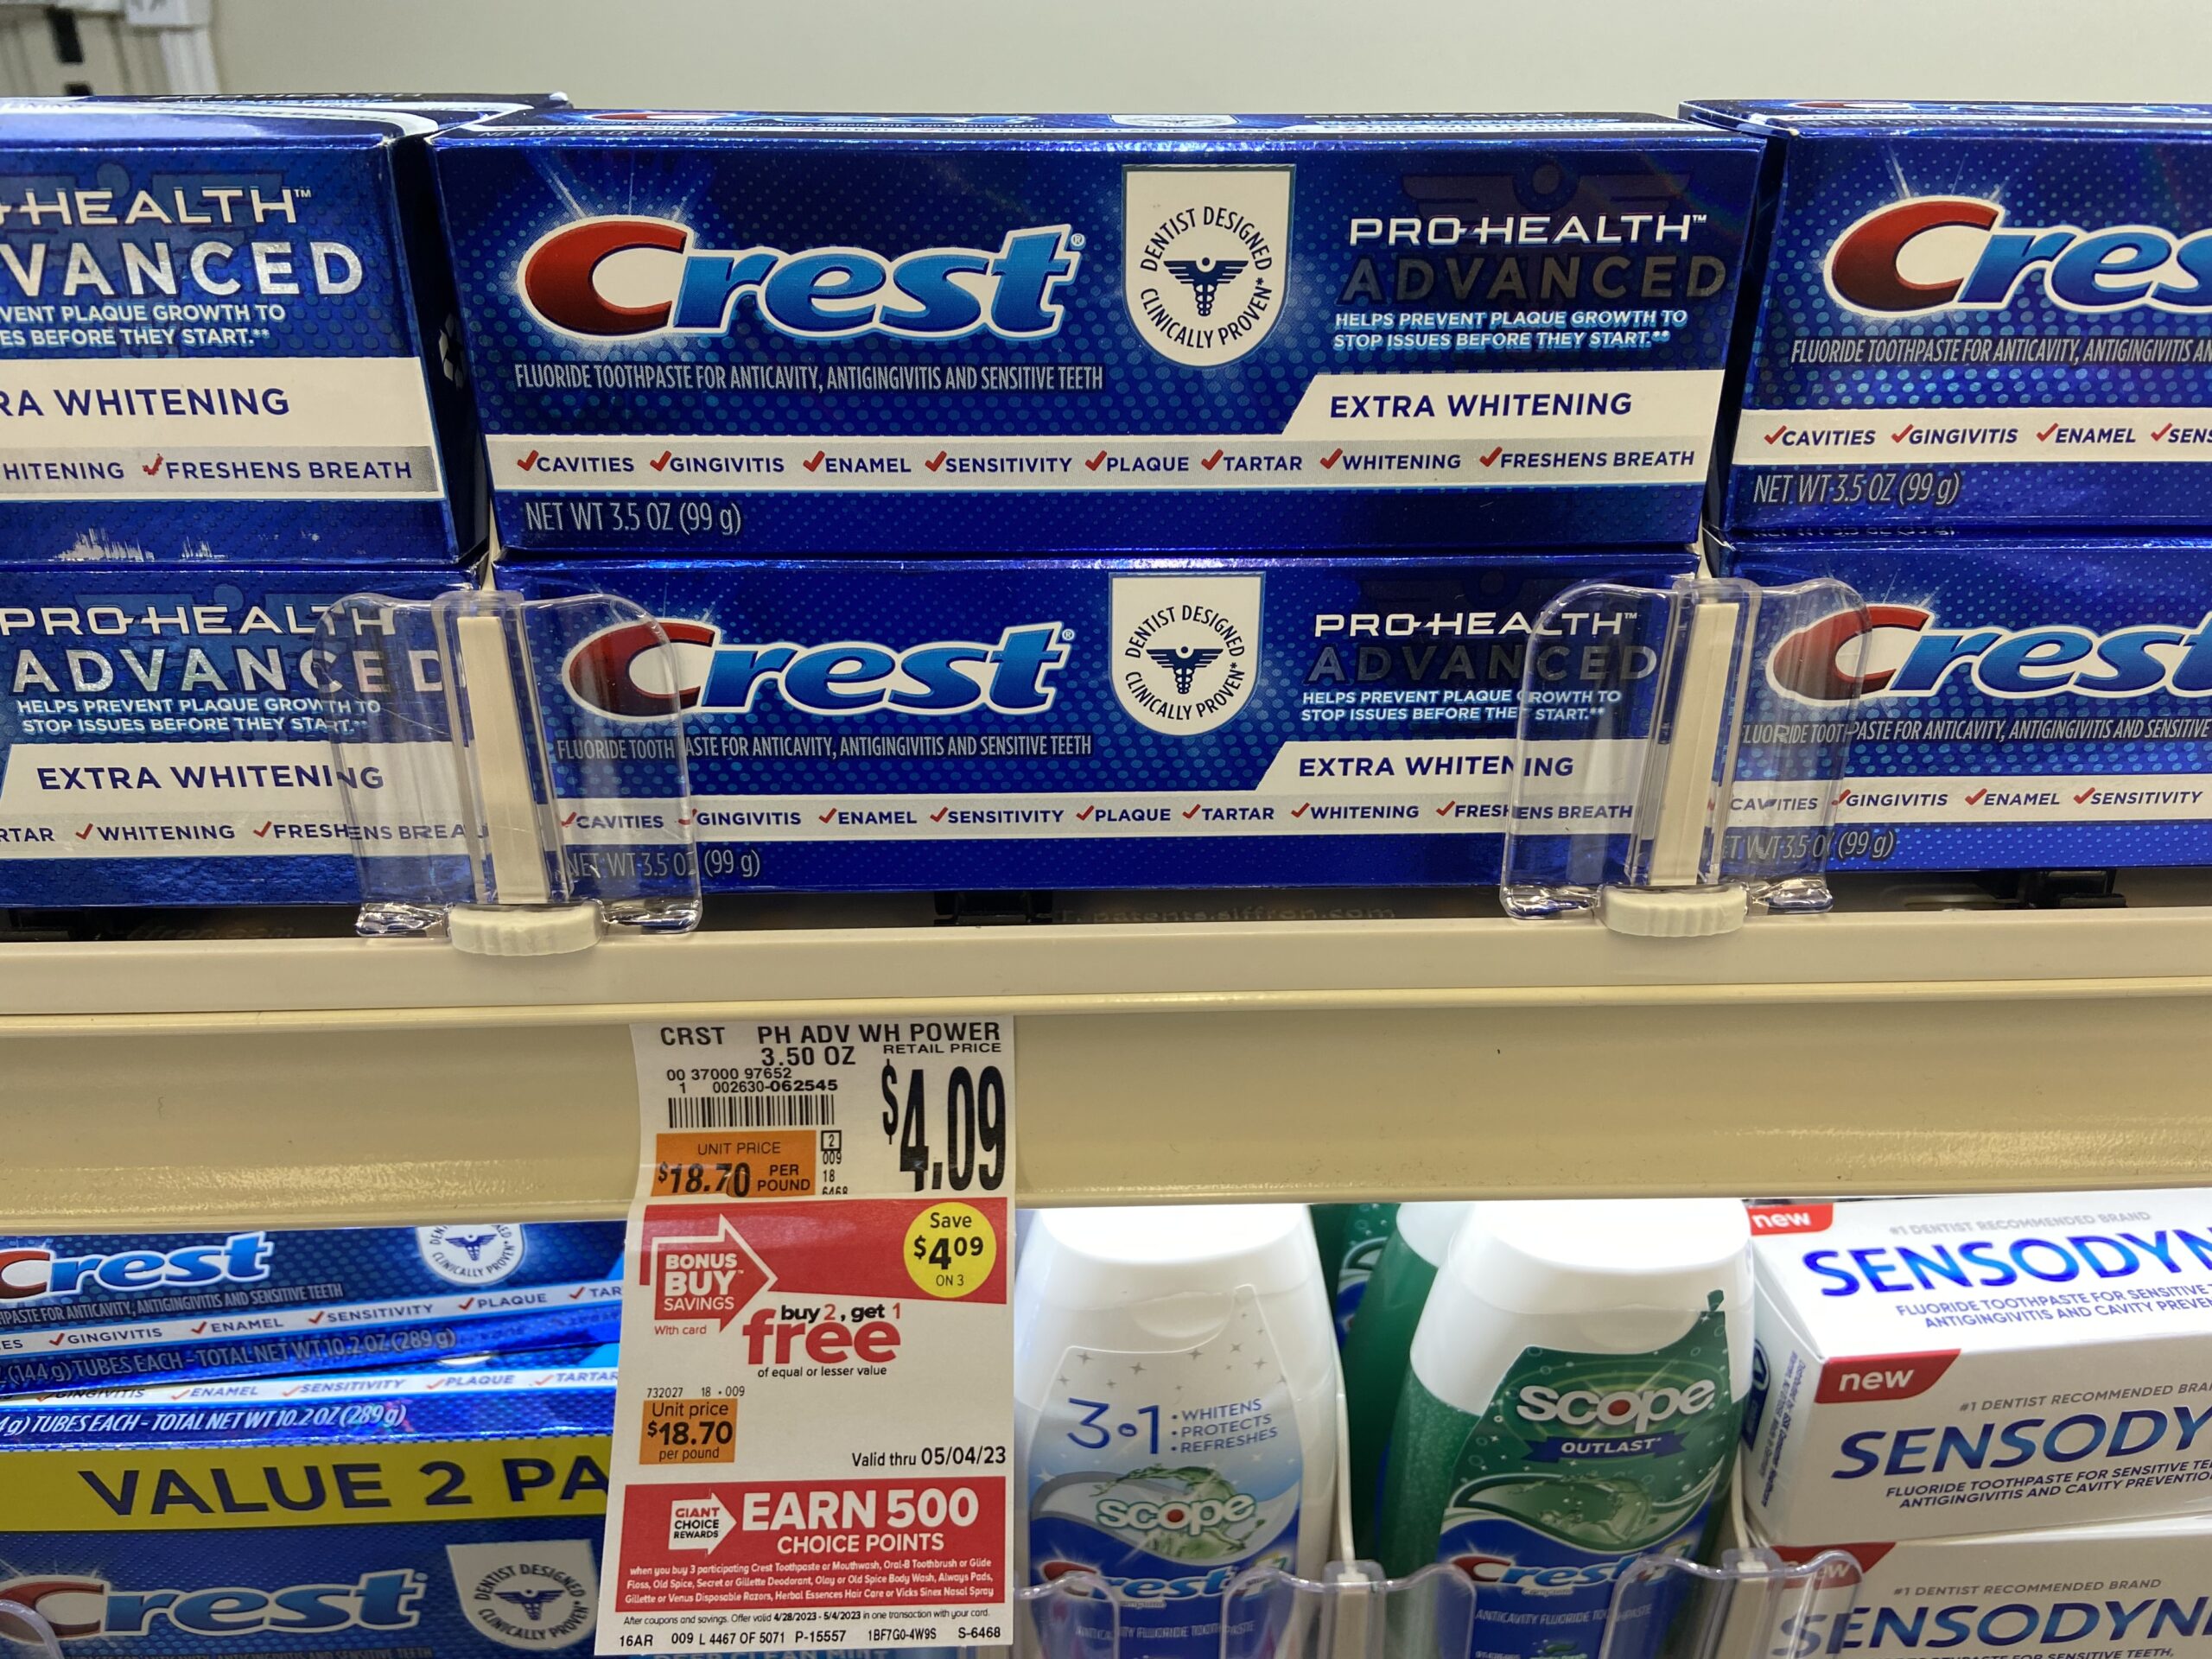 Giant Deal on Crest Toothpaste